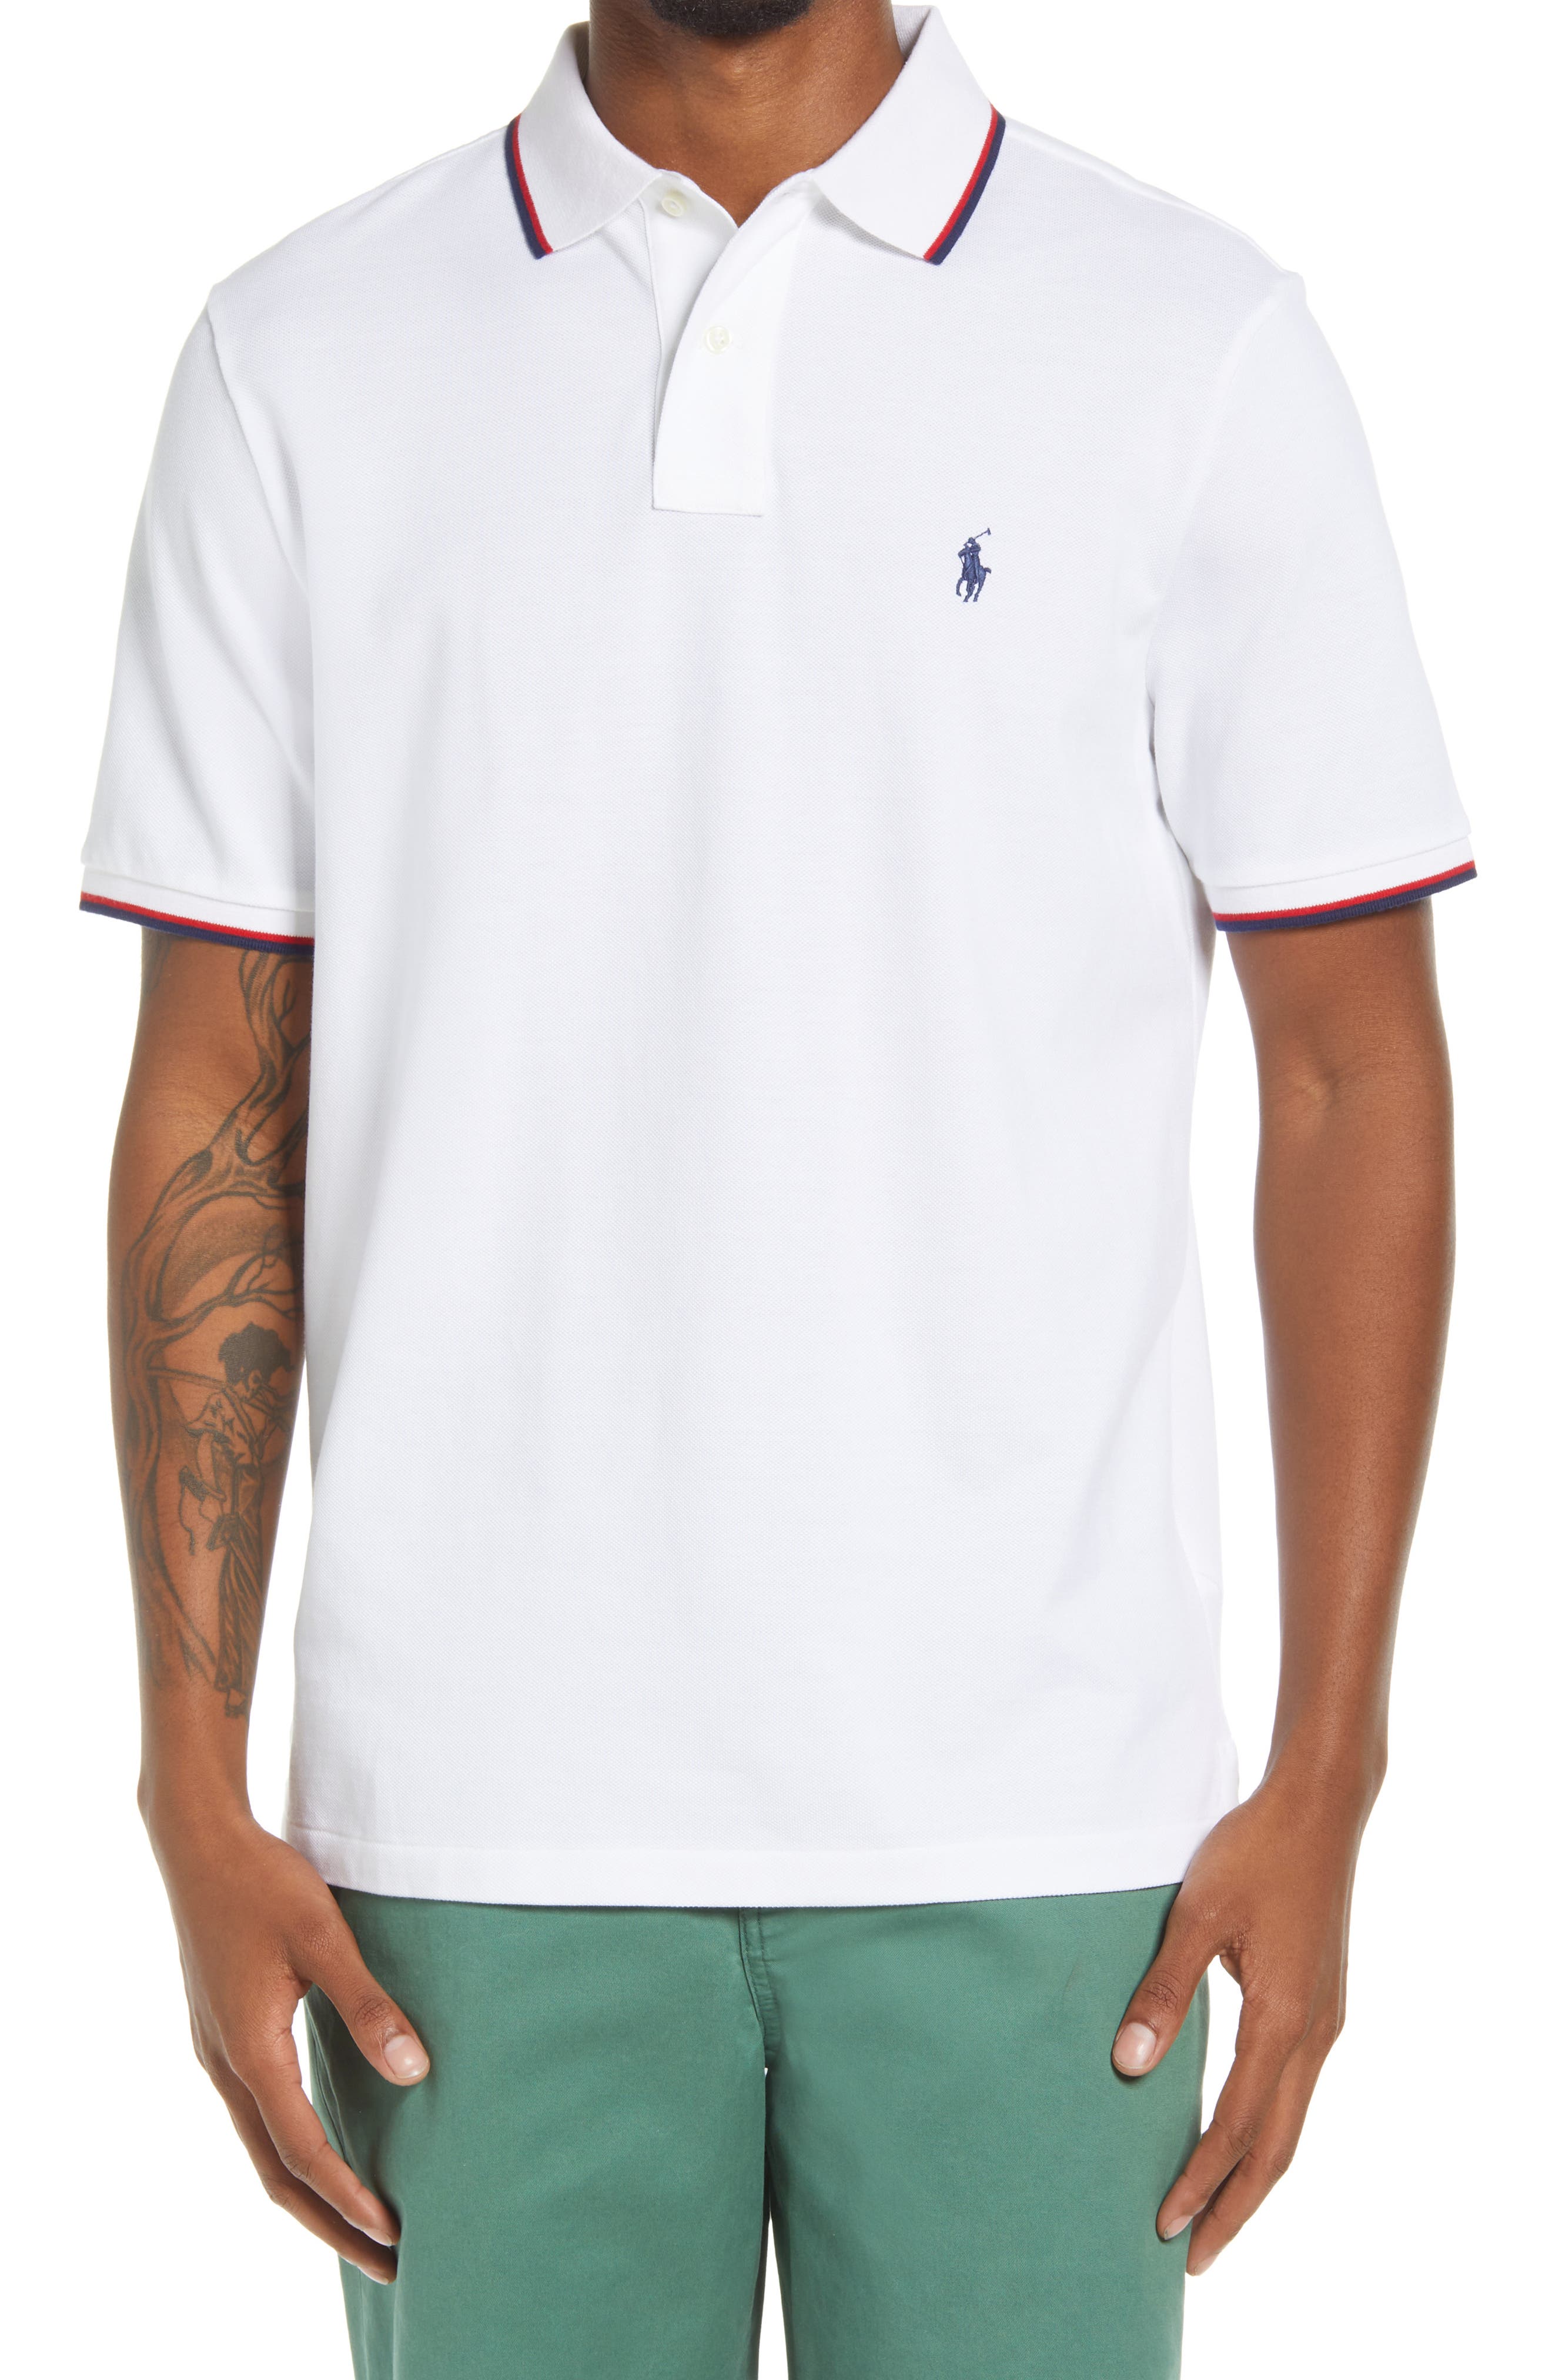 POLO RALPH LAUREN Men's Classic Fit Mesh Pony Logo Polo, Polo Black, Small  at  Men's Clothing store: Tennis Shirts